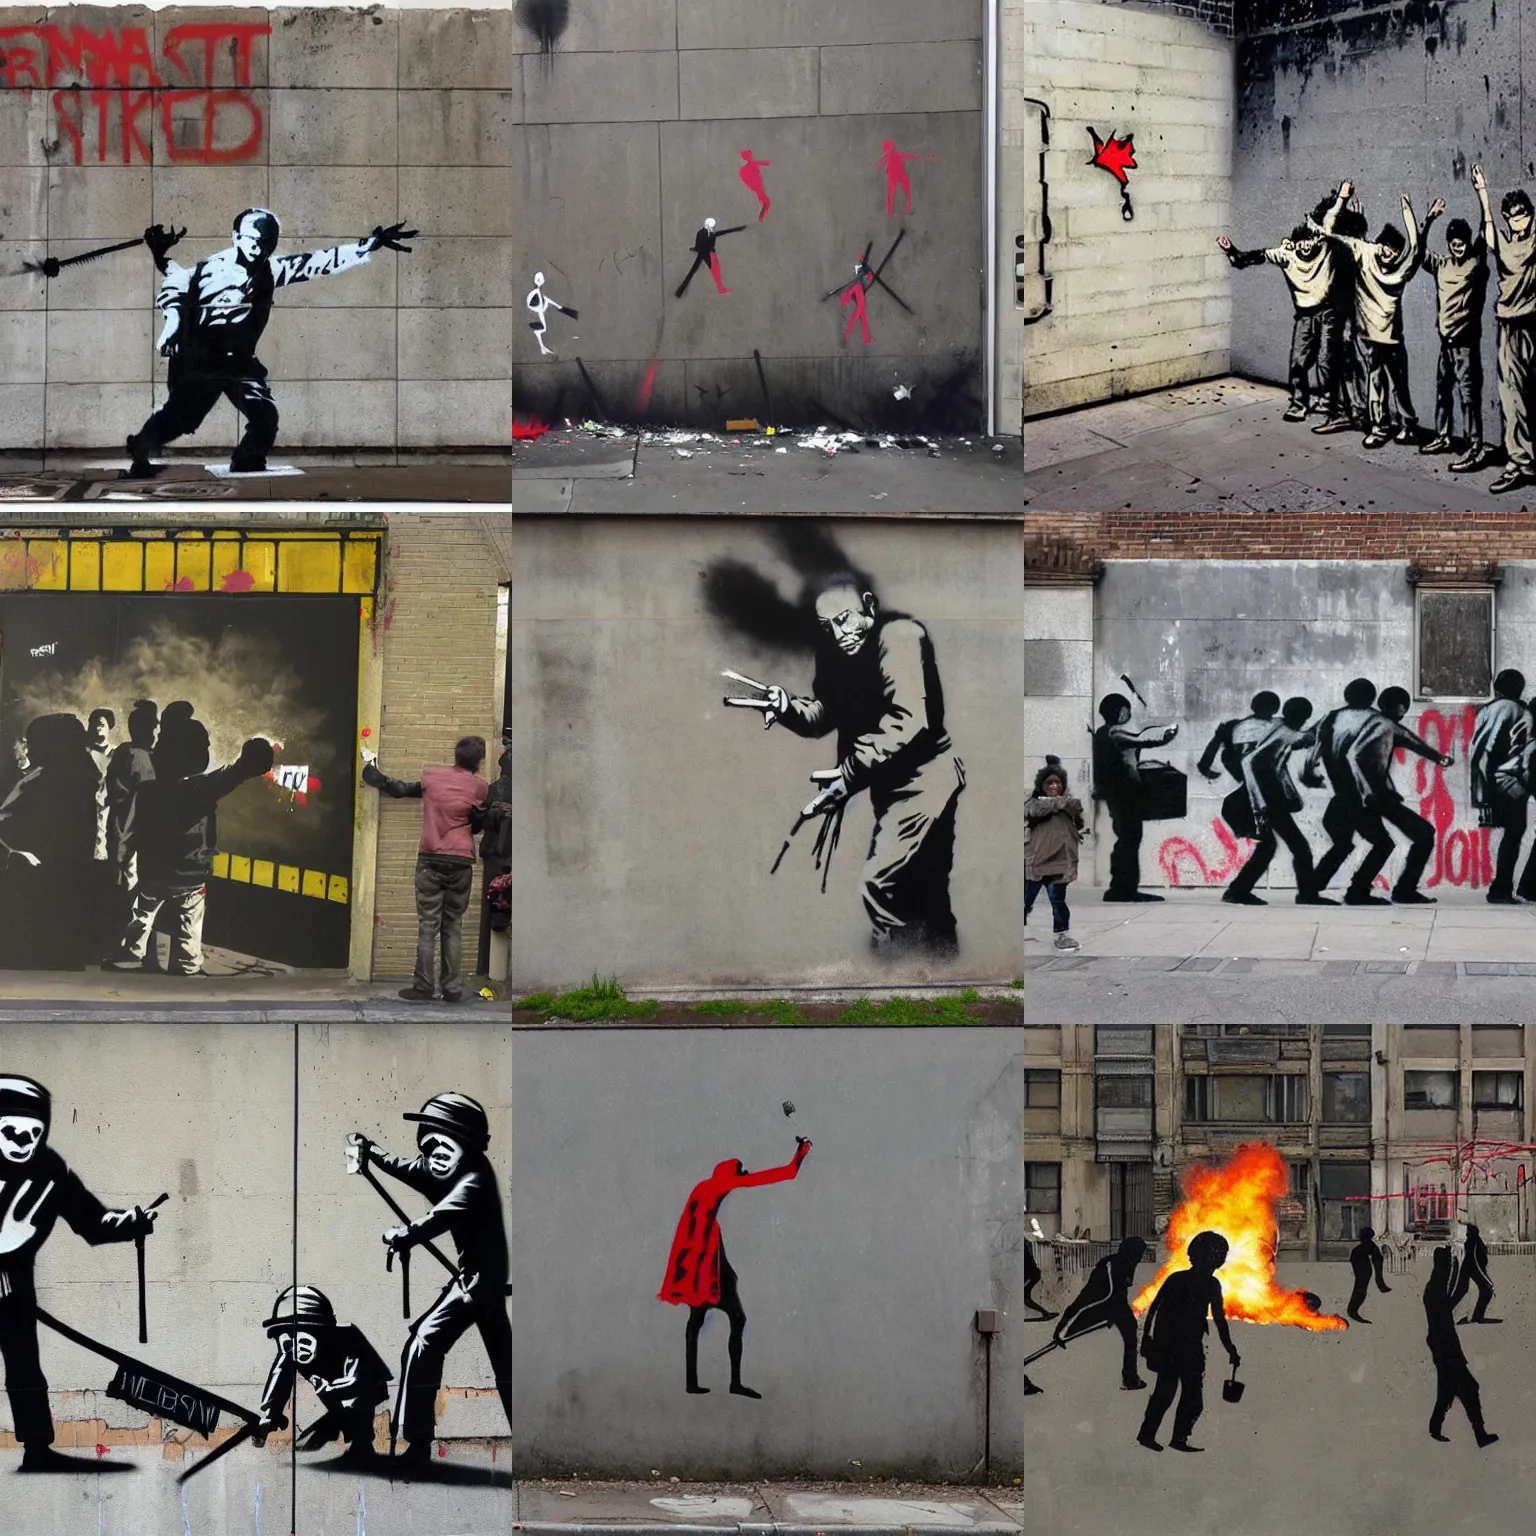 Prompt: artwork by Bansky showing street riots